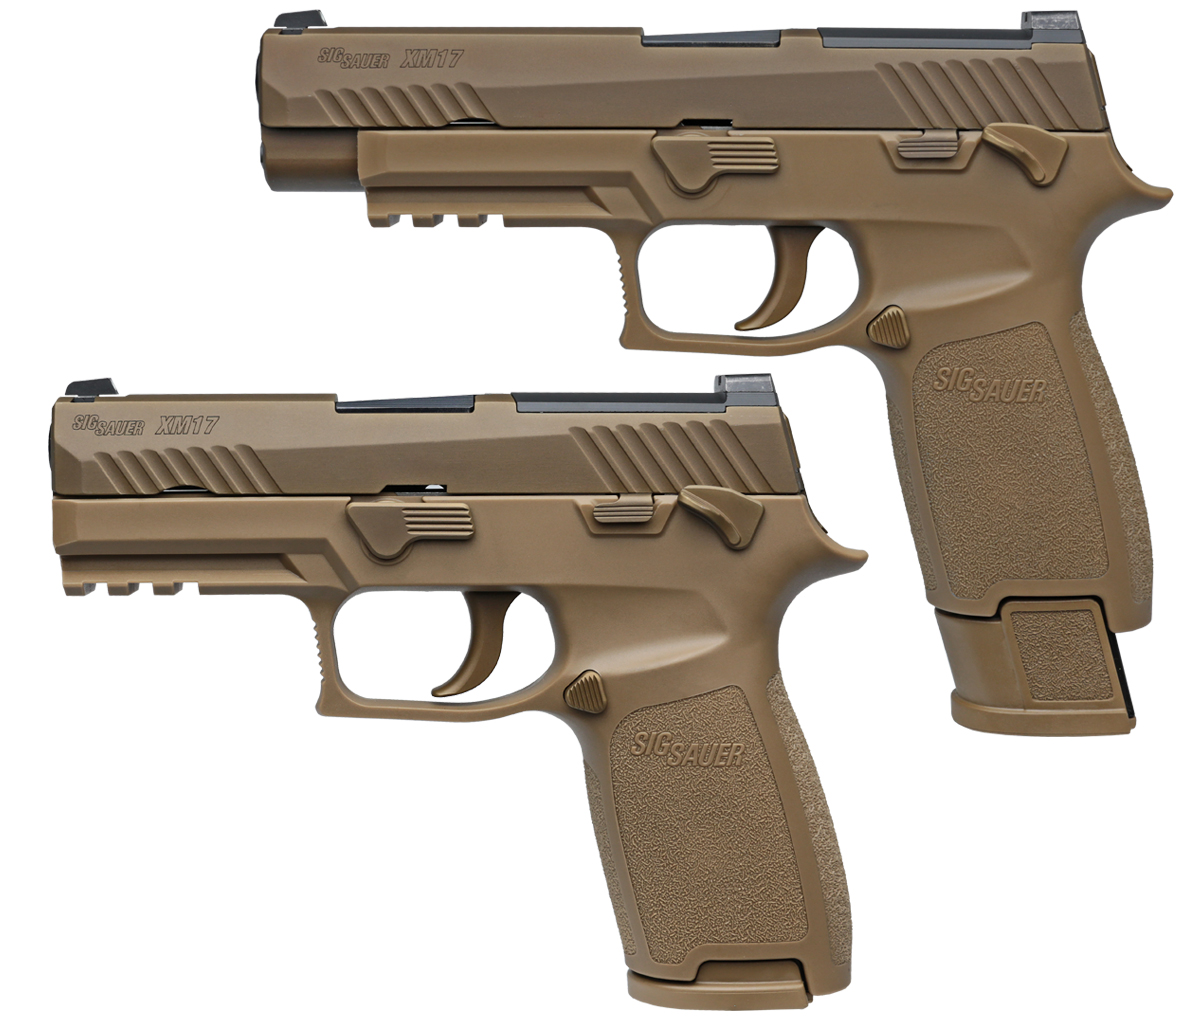 Glock 17 Pistol Issued To Armed Forces, Politics News, glock 17